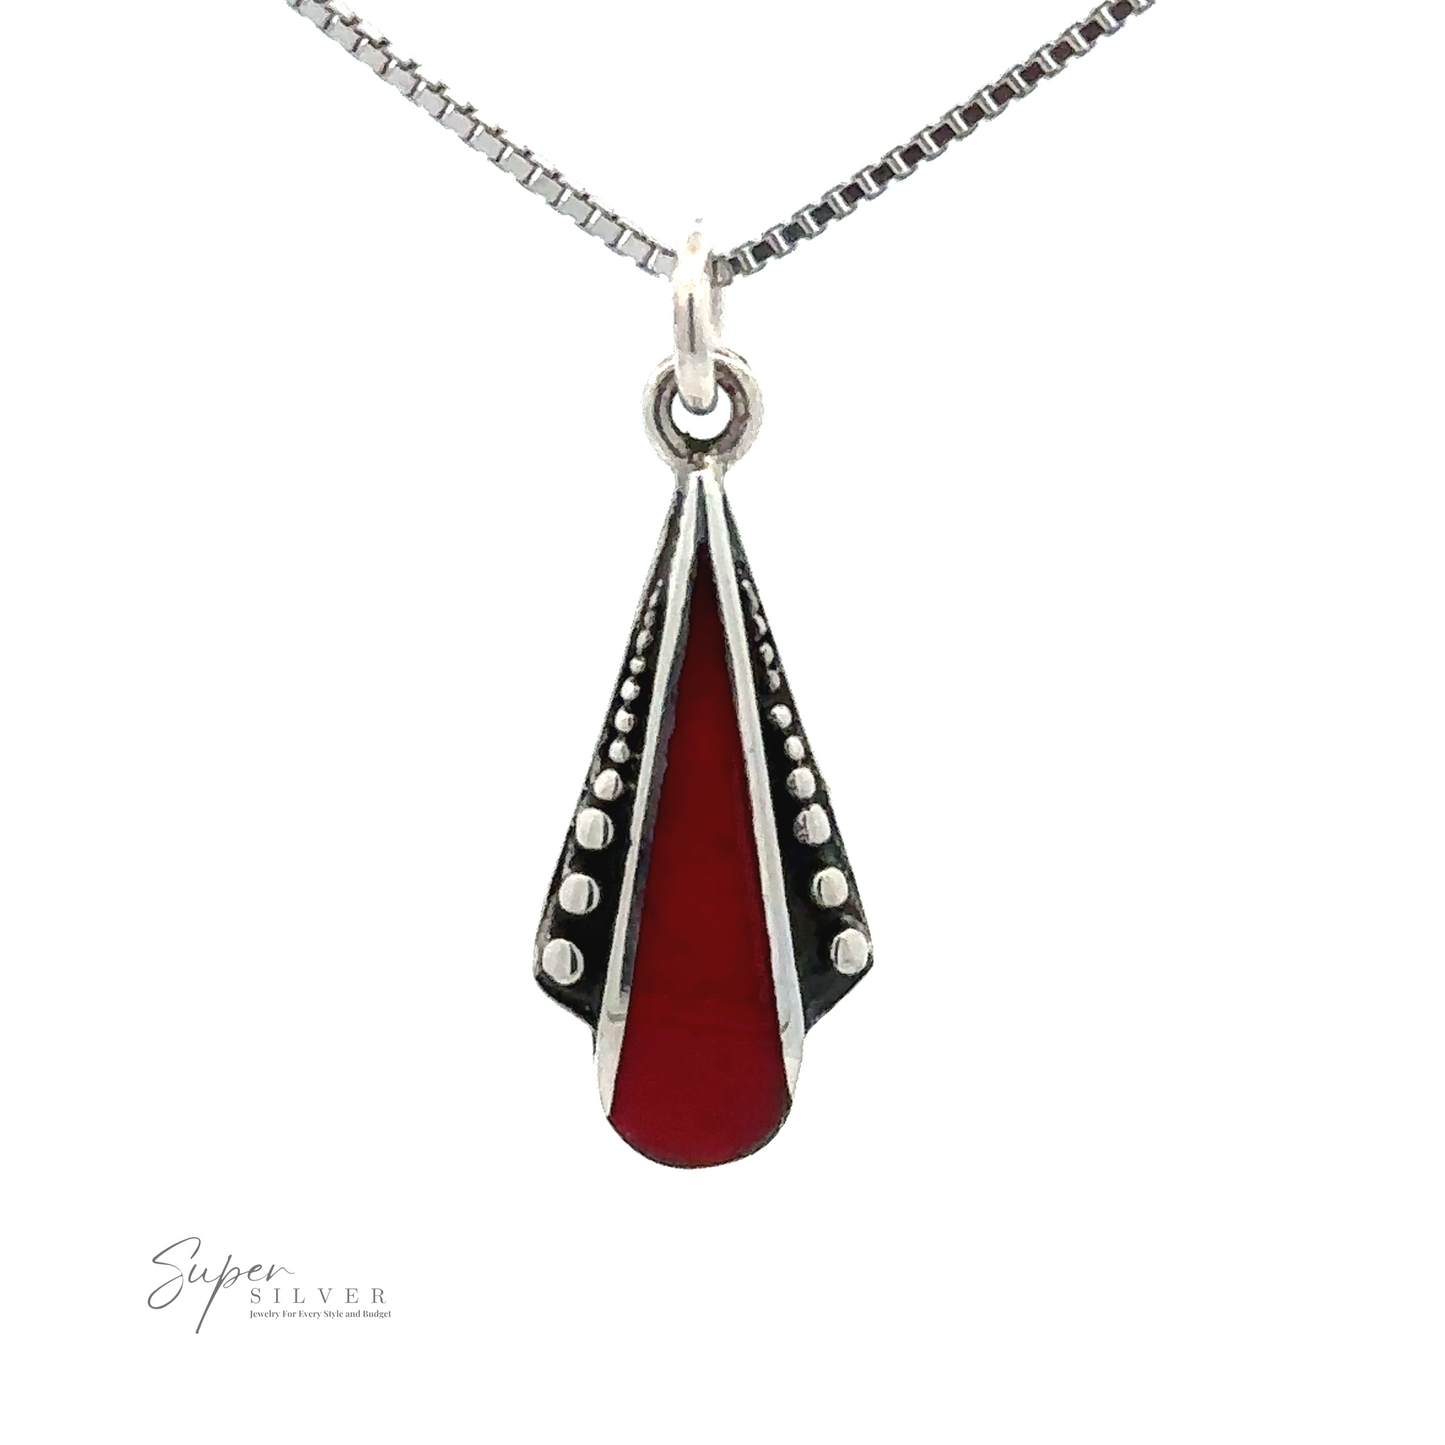 
                  
                    A sterling silver necklace features a Teardrop Pendant with Inlaid Stones and Ball Border. The thin chain links evenly, enhancing the modern and sleek design of the inlaid stones.
                  
                